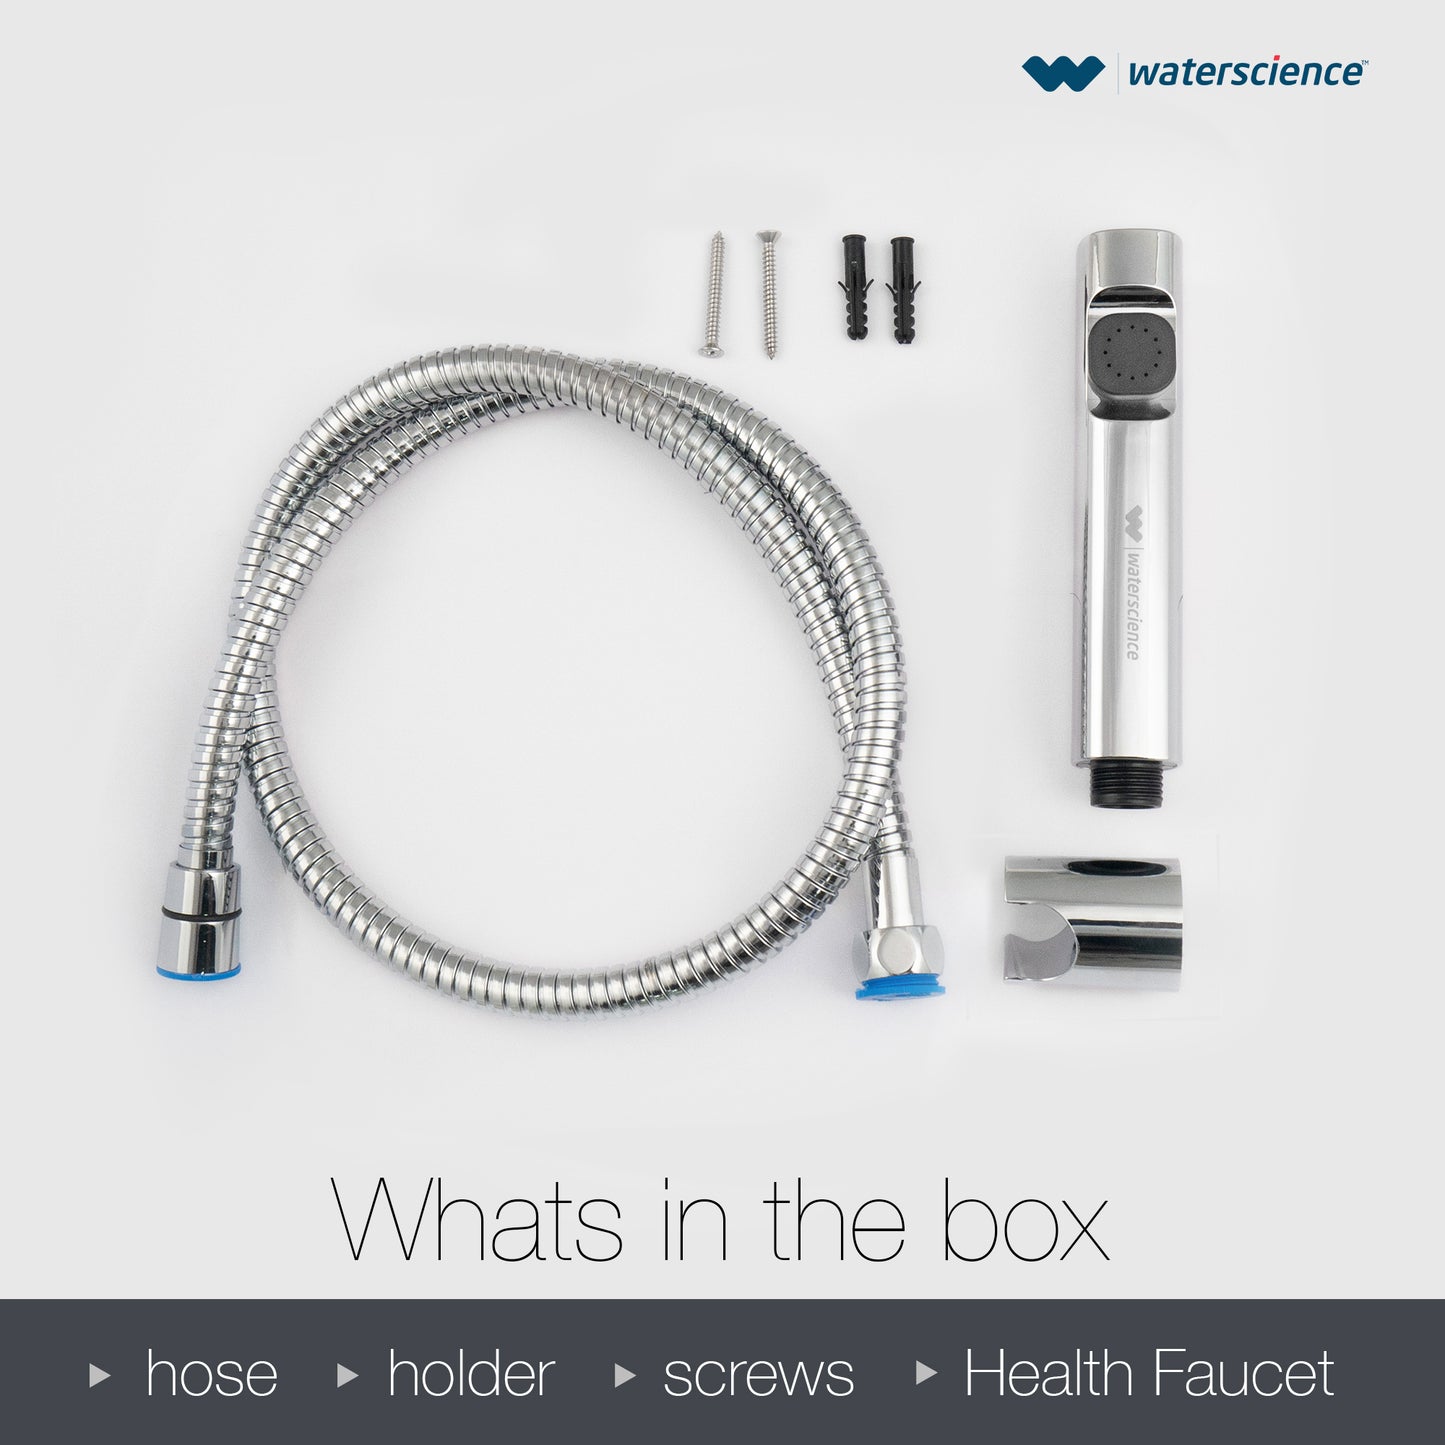 Health Faucet with Sediment and Dust Filter